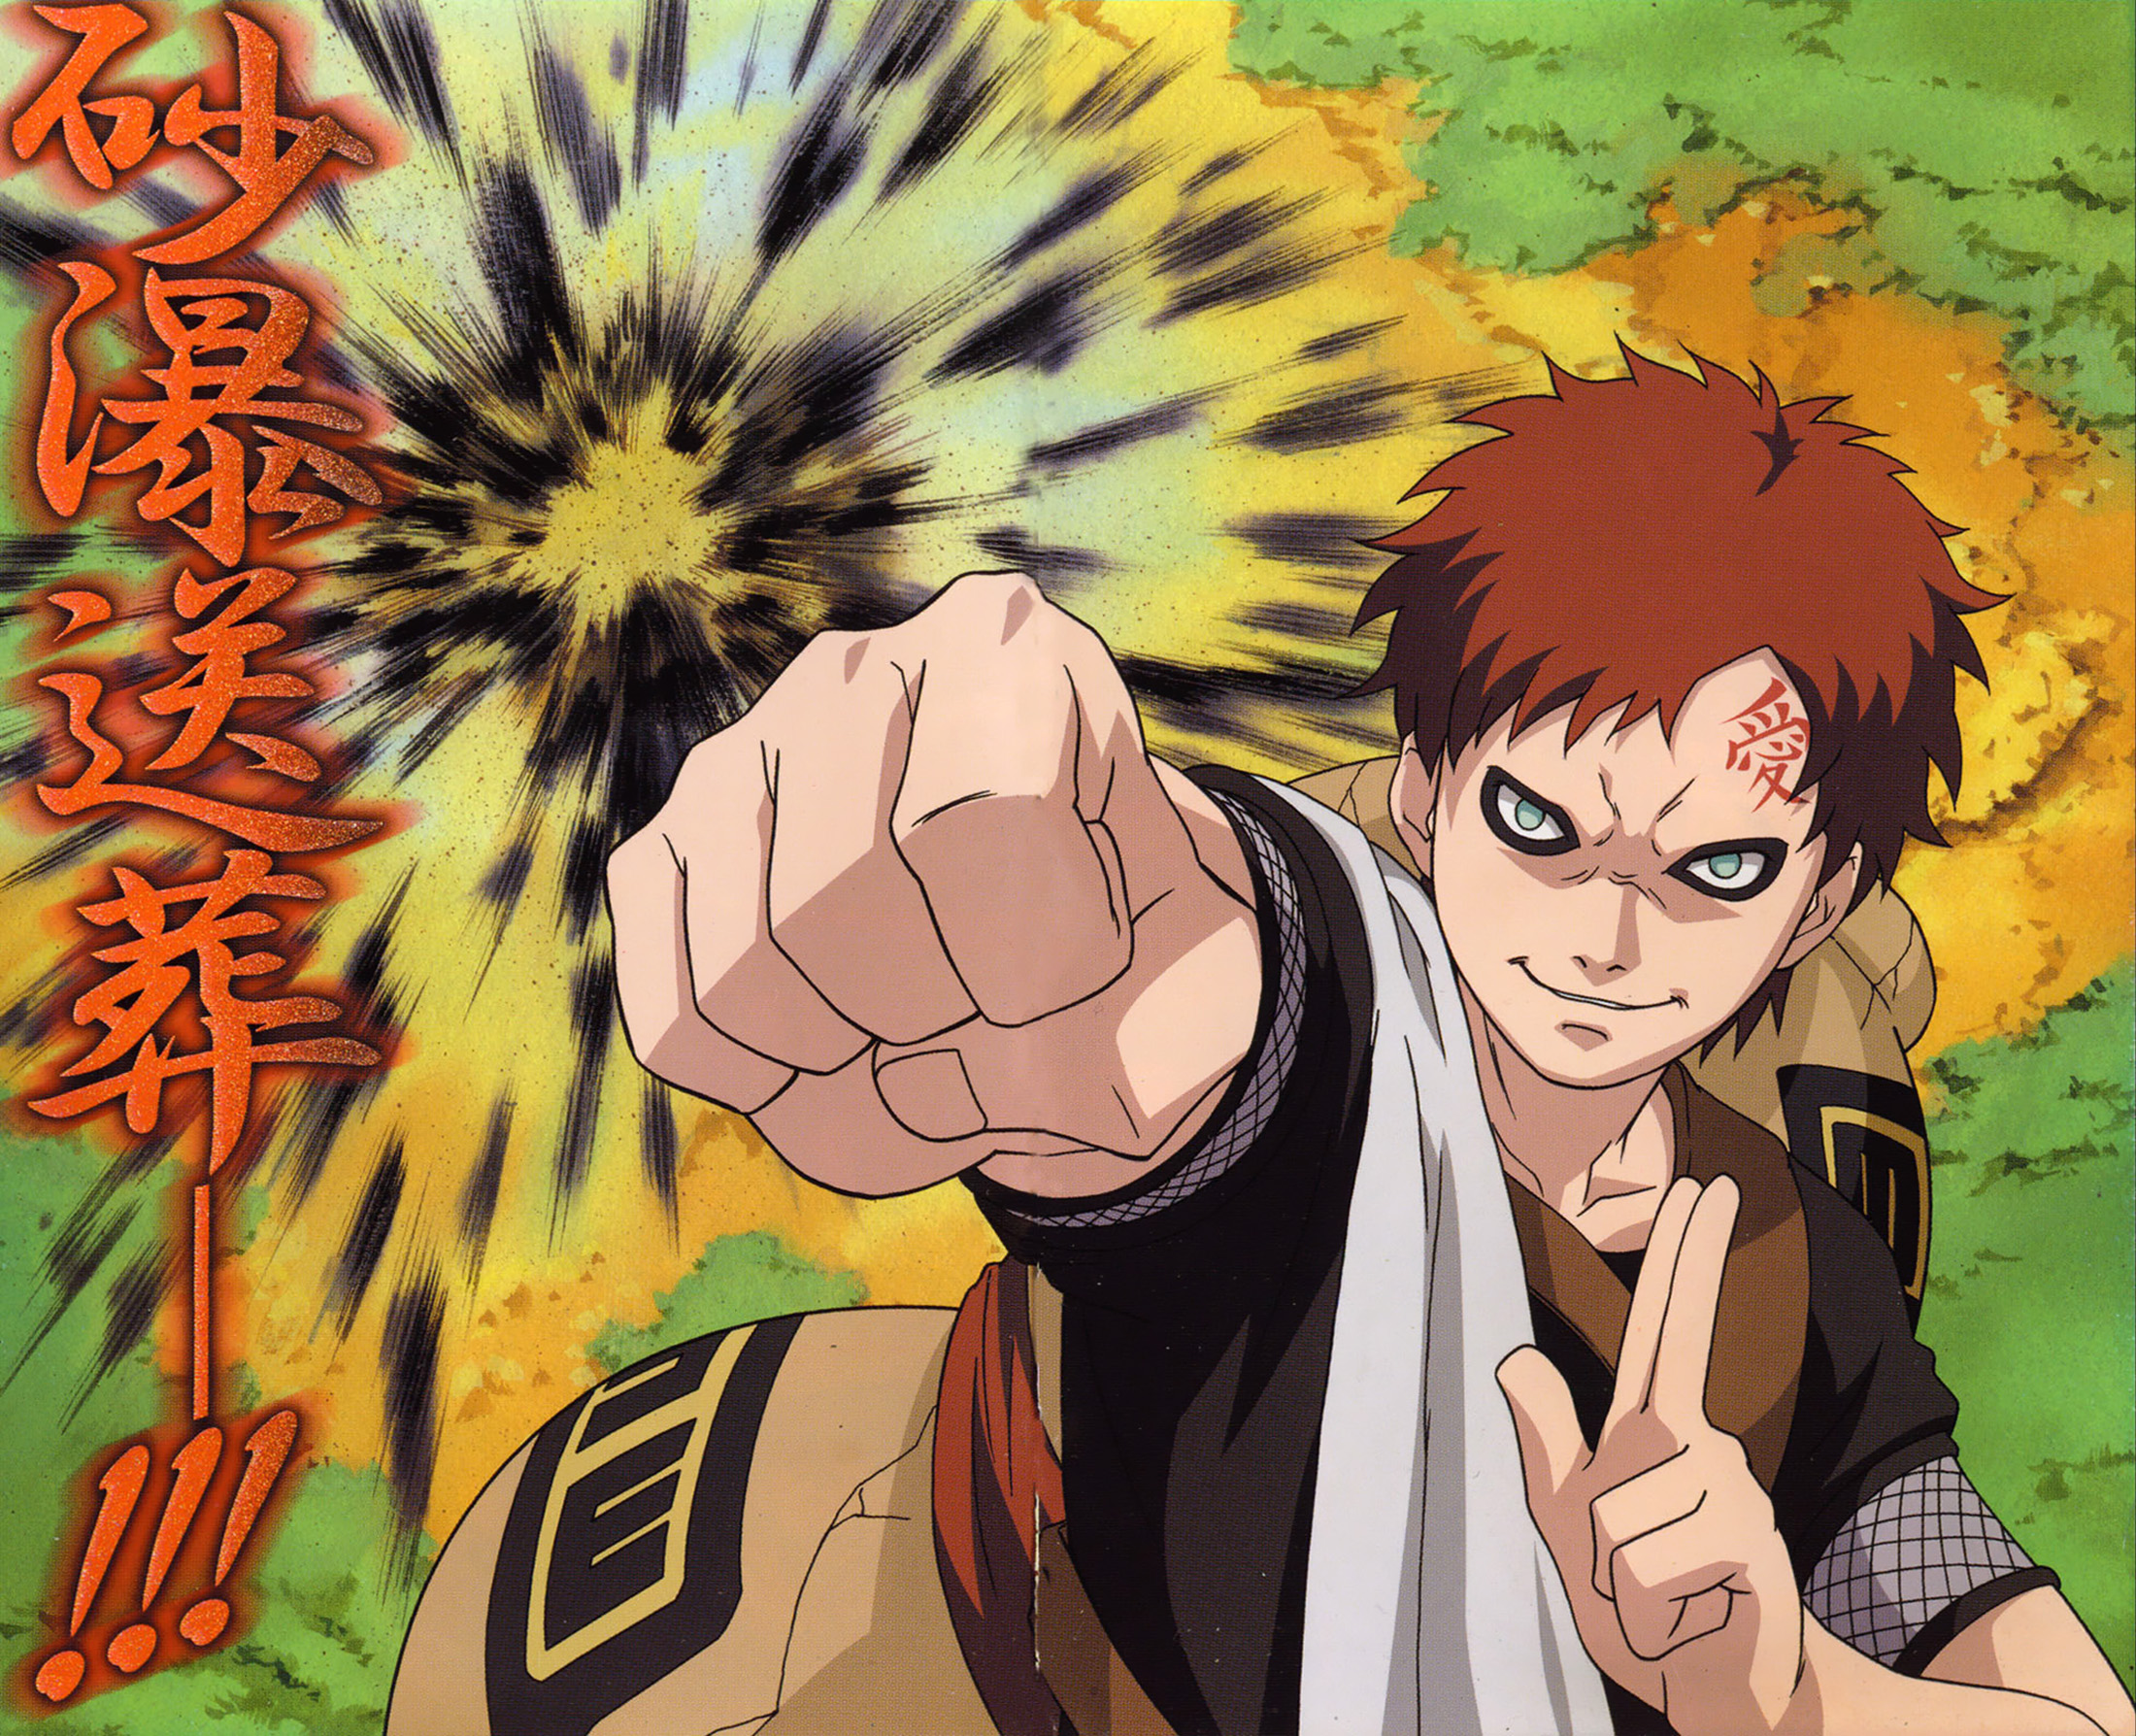 GAARA and the sand image Wallpaper HD wallpaper and background